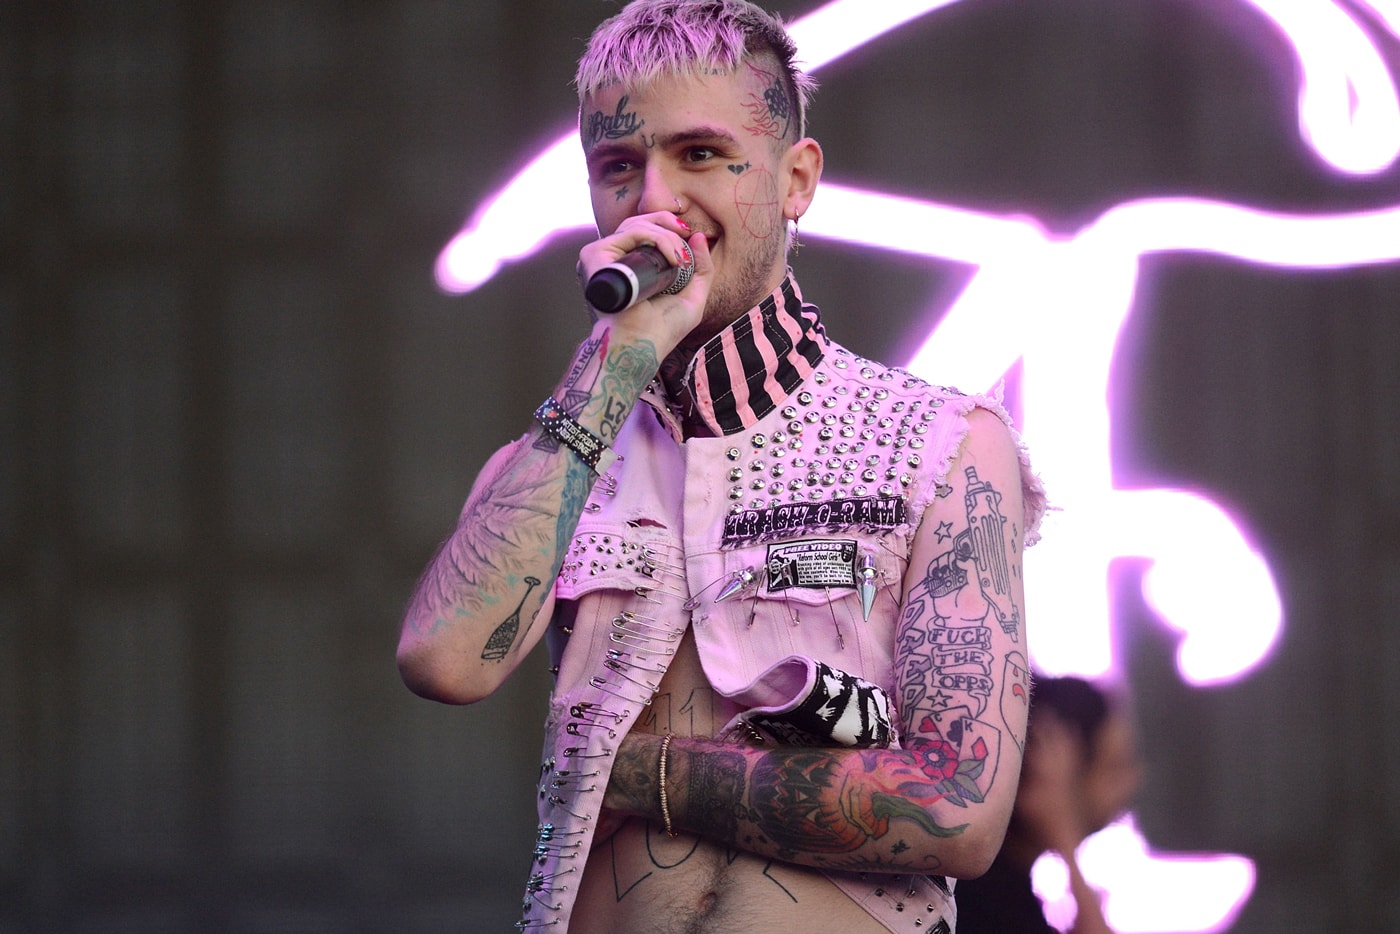 Lil Peep Announces Tour & Shares "WitchBlades" Video Featuring Lil Tracy